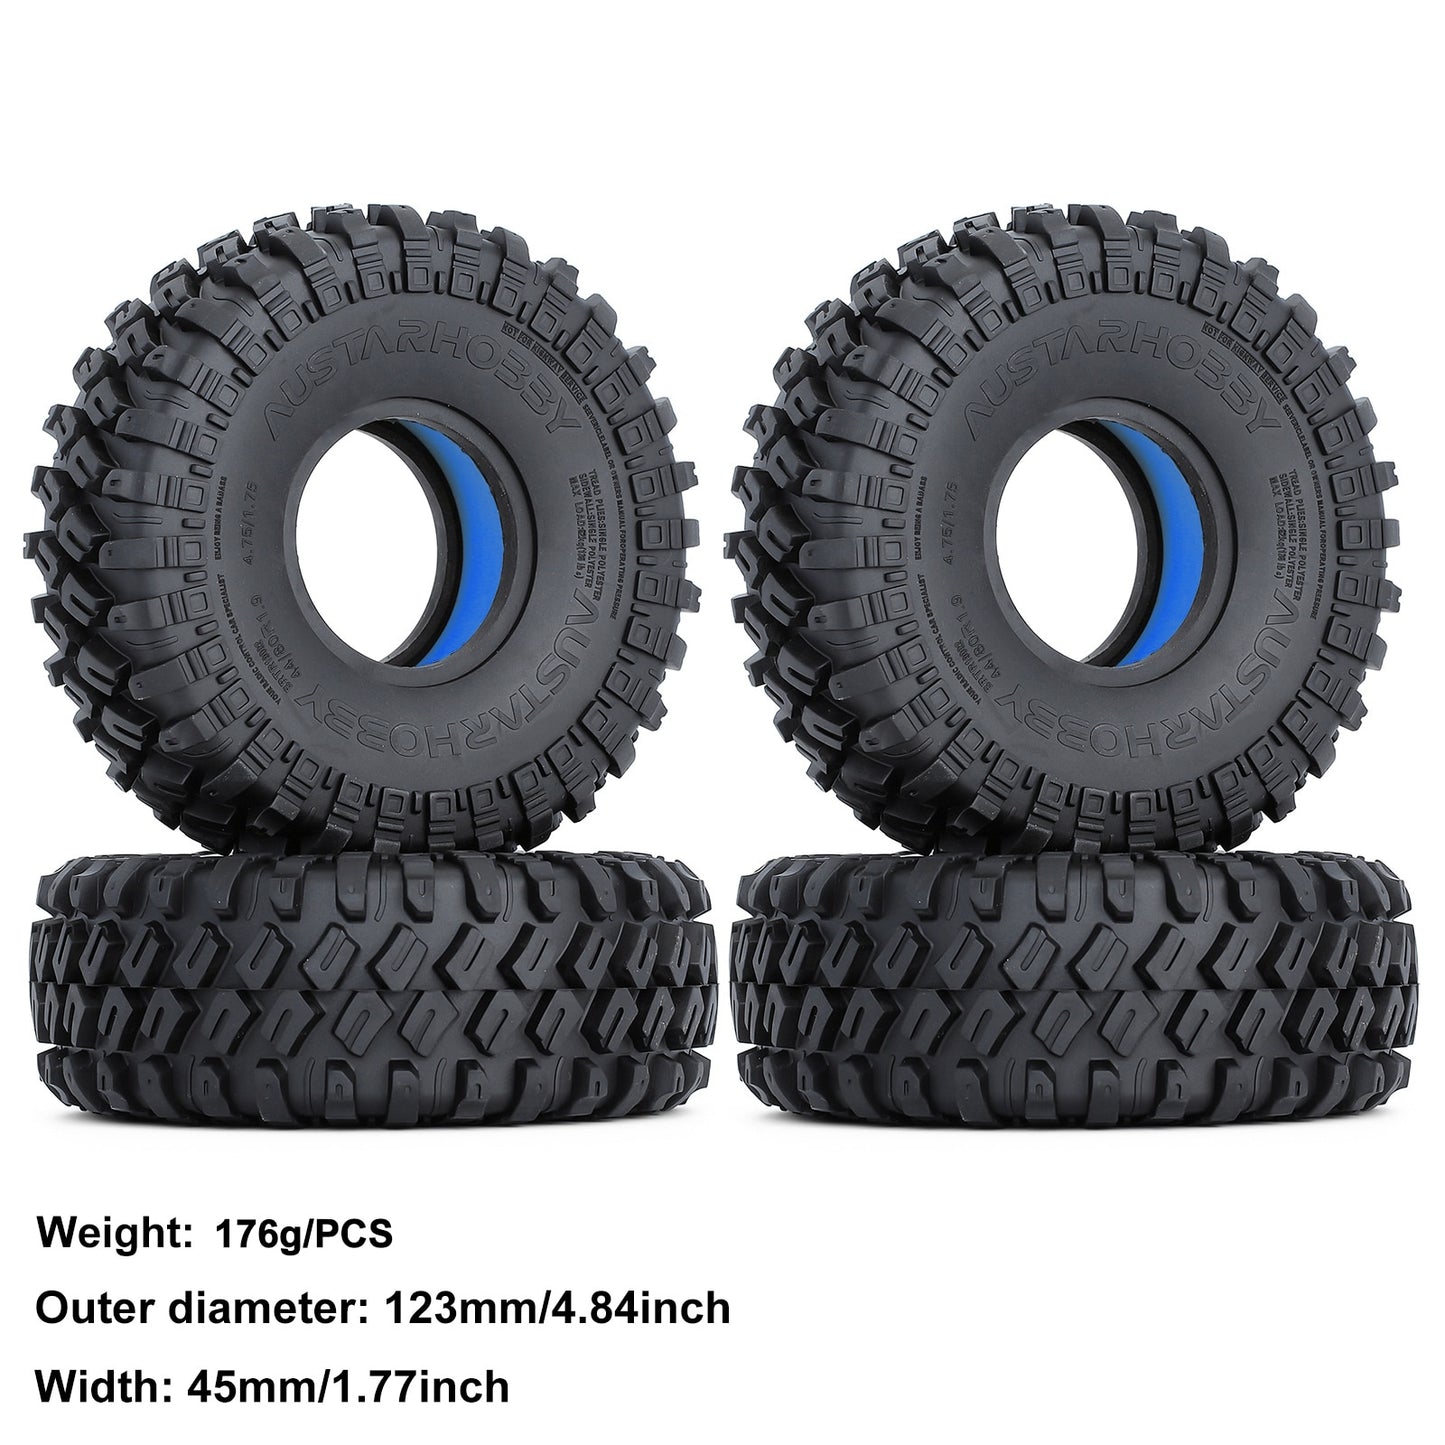 INJORA 1.9" Rubber Wheel Tires with TPE Dual Stage Foam for RC Crawler Car Axial SCX10 90046 TRX4 Upgrade Parts